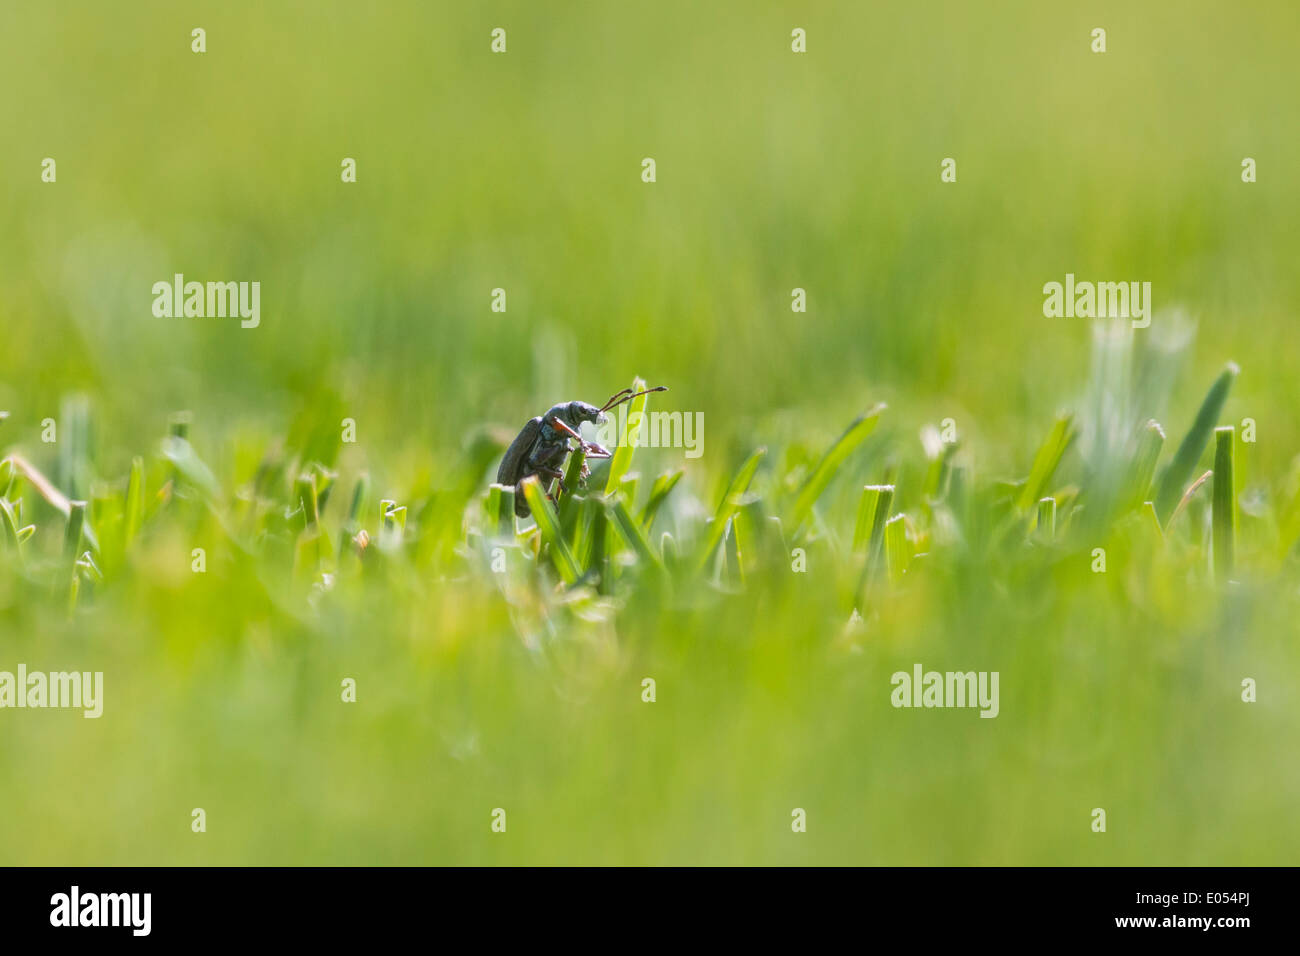 A small beetle climbing out of the grass Stock Photo